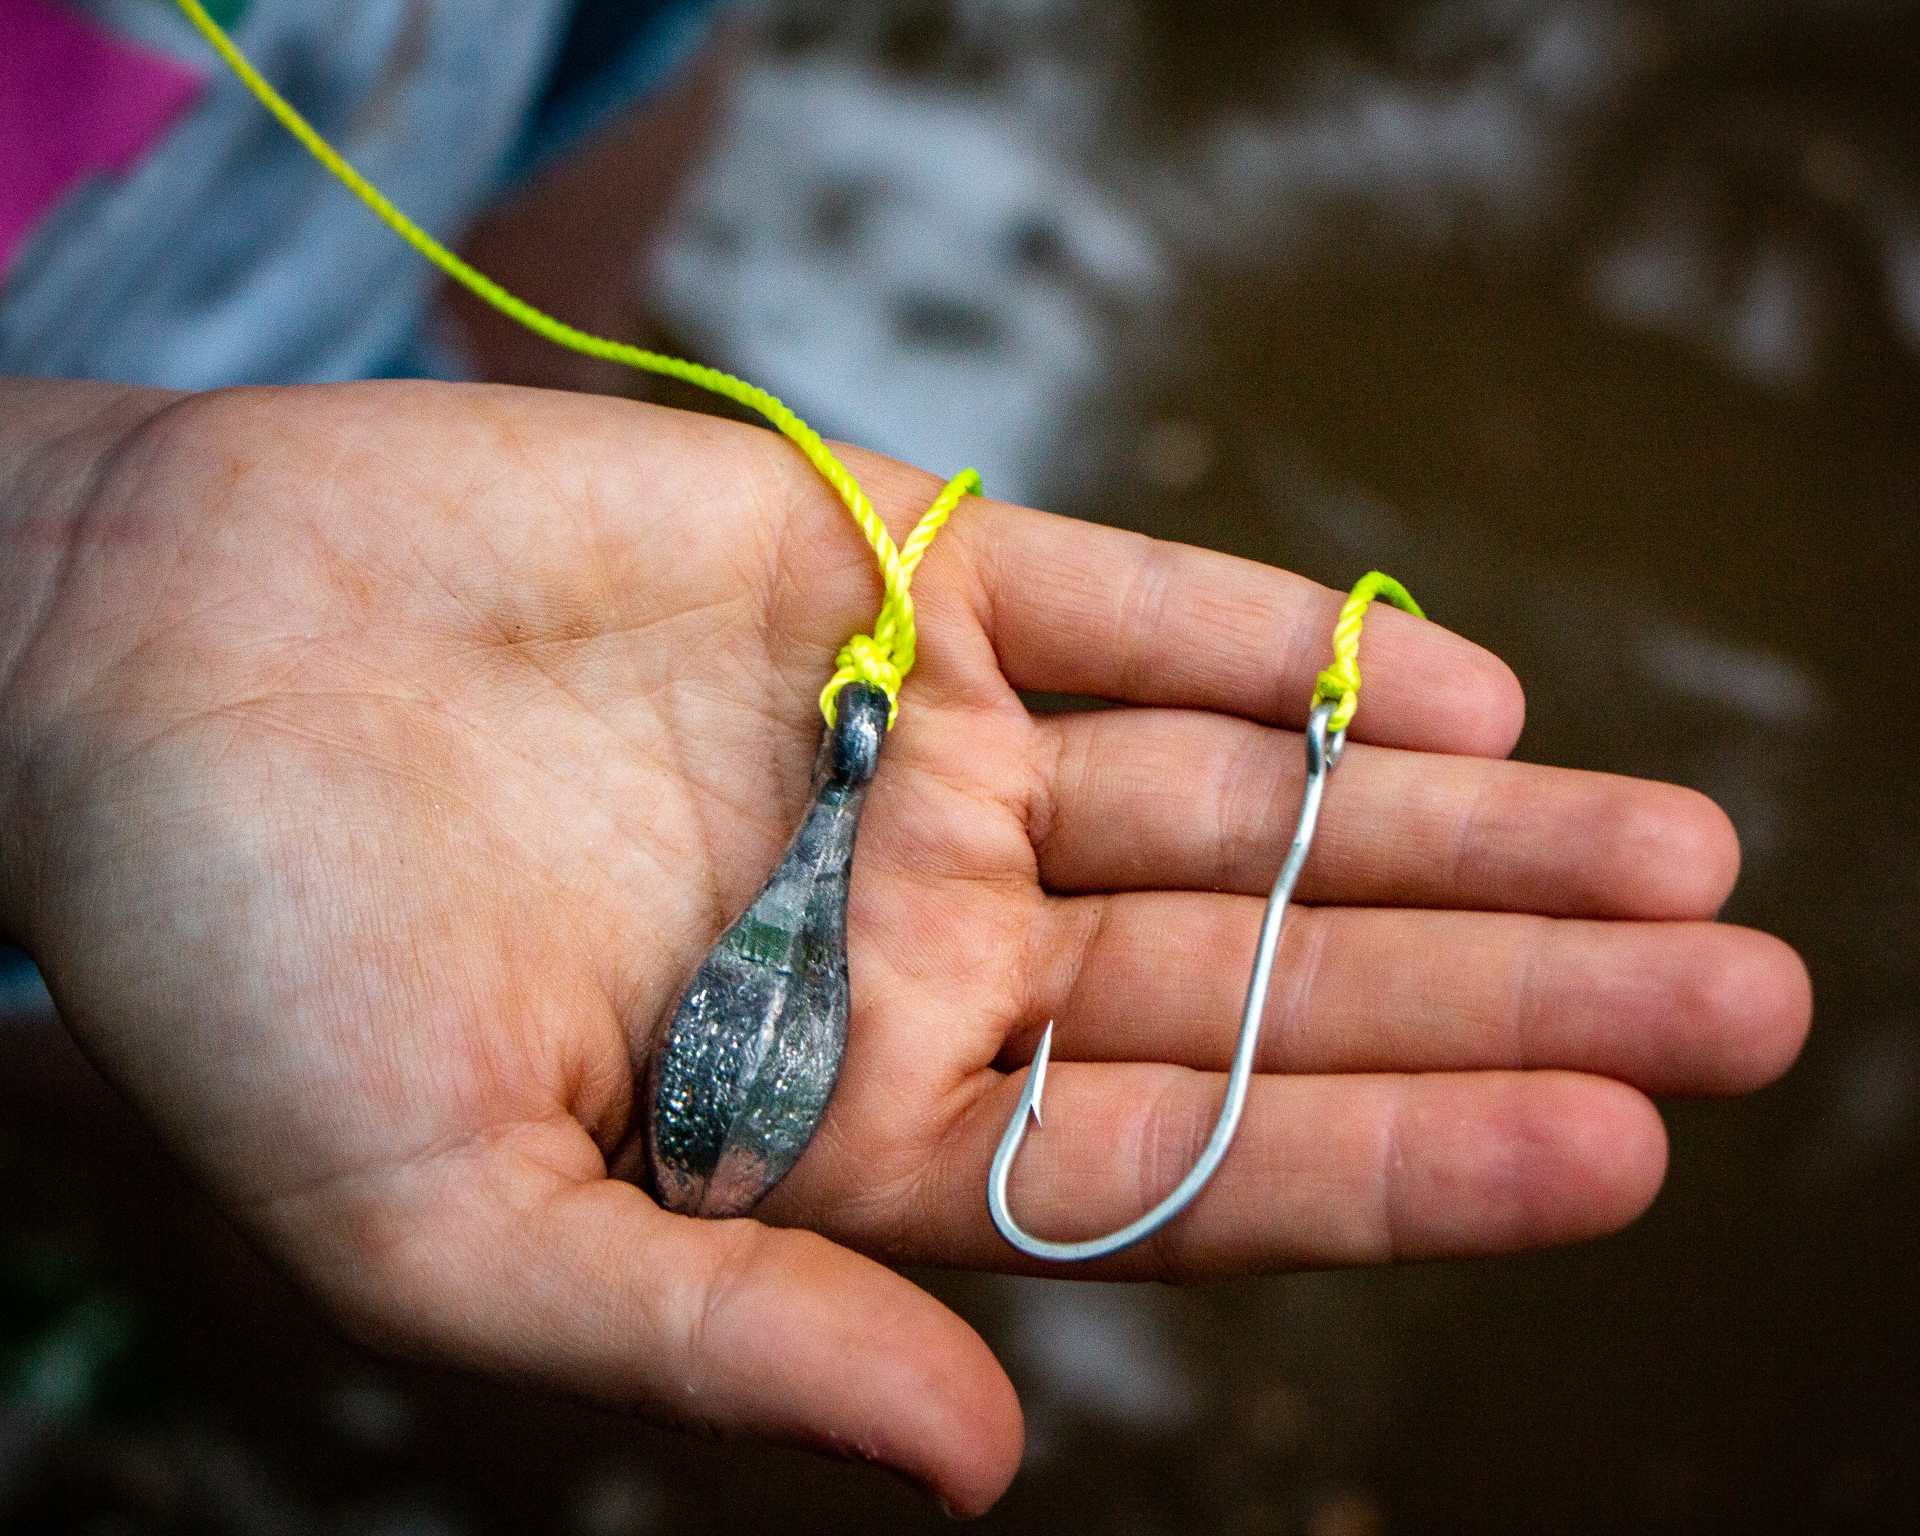 Limb lines are a crucial part of the catfishing process. Find out how to properly make limb lines here.